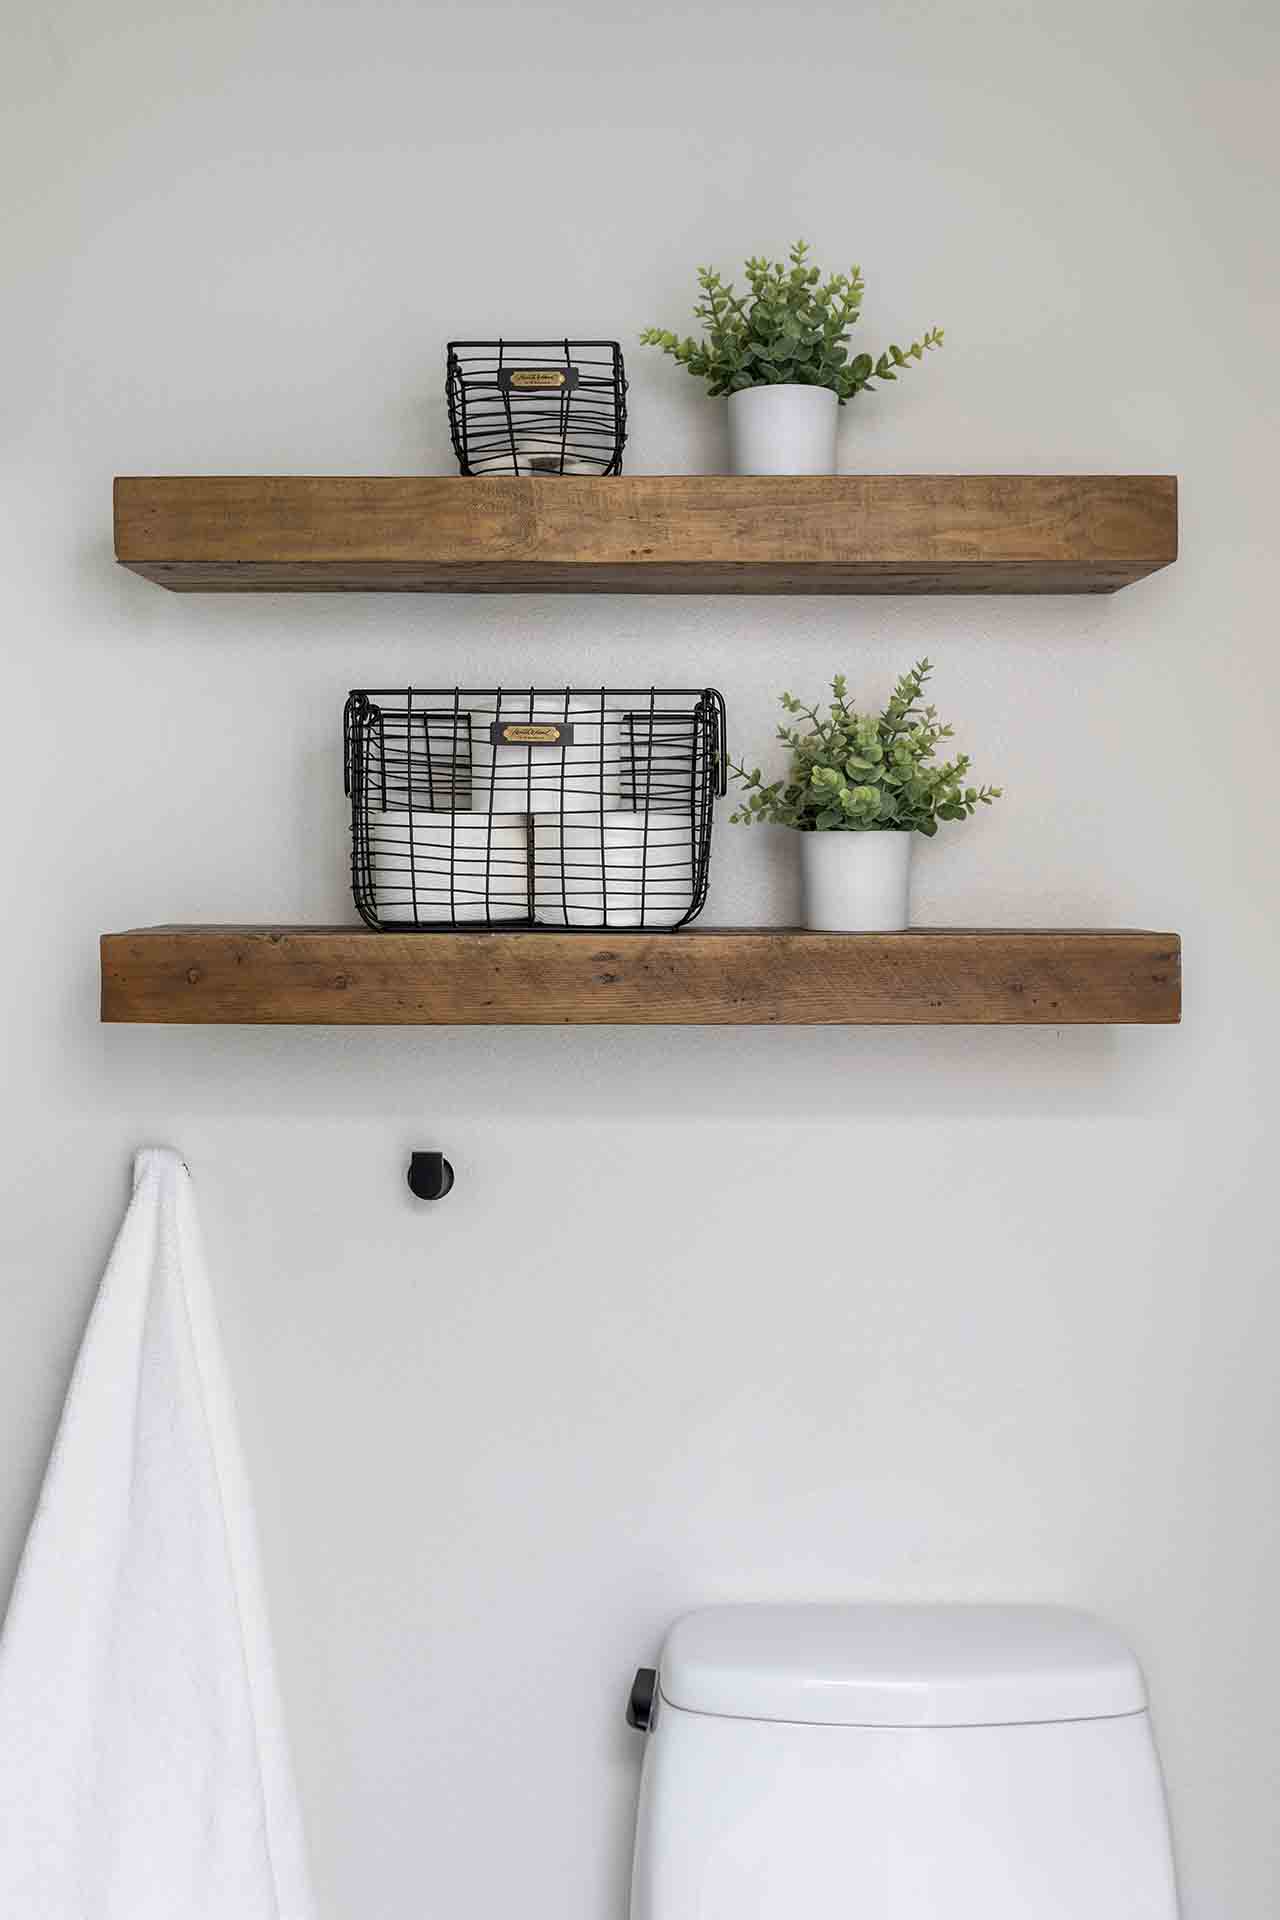 Toilet and floating shelves